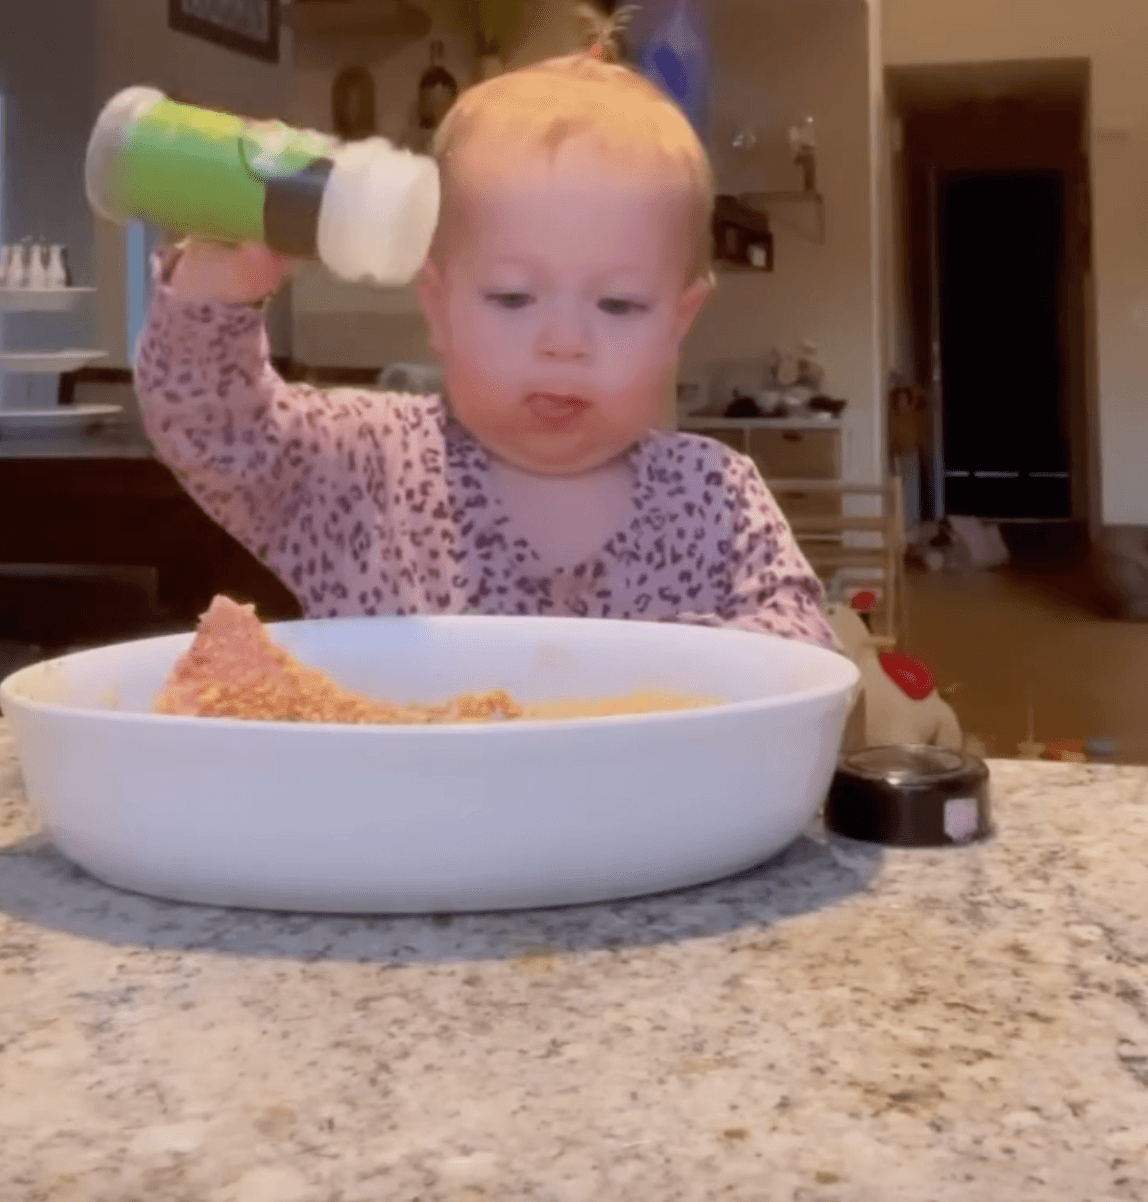 Penelope trying her hand in the kitchen when she was 15 months old. (Courtesy of <a href="https://www.instagram.com/chefpennykay/">@chefpennykay</a>)